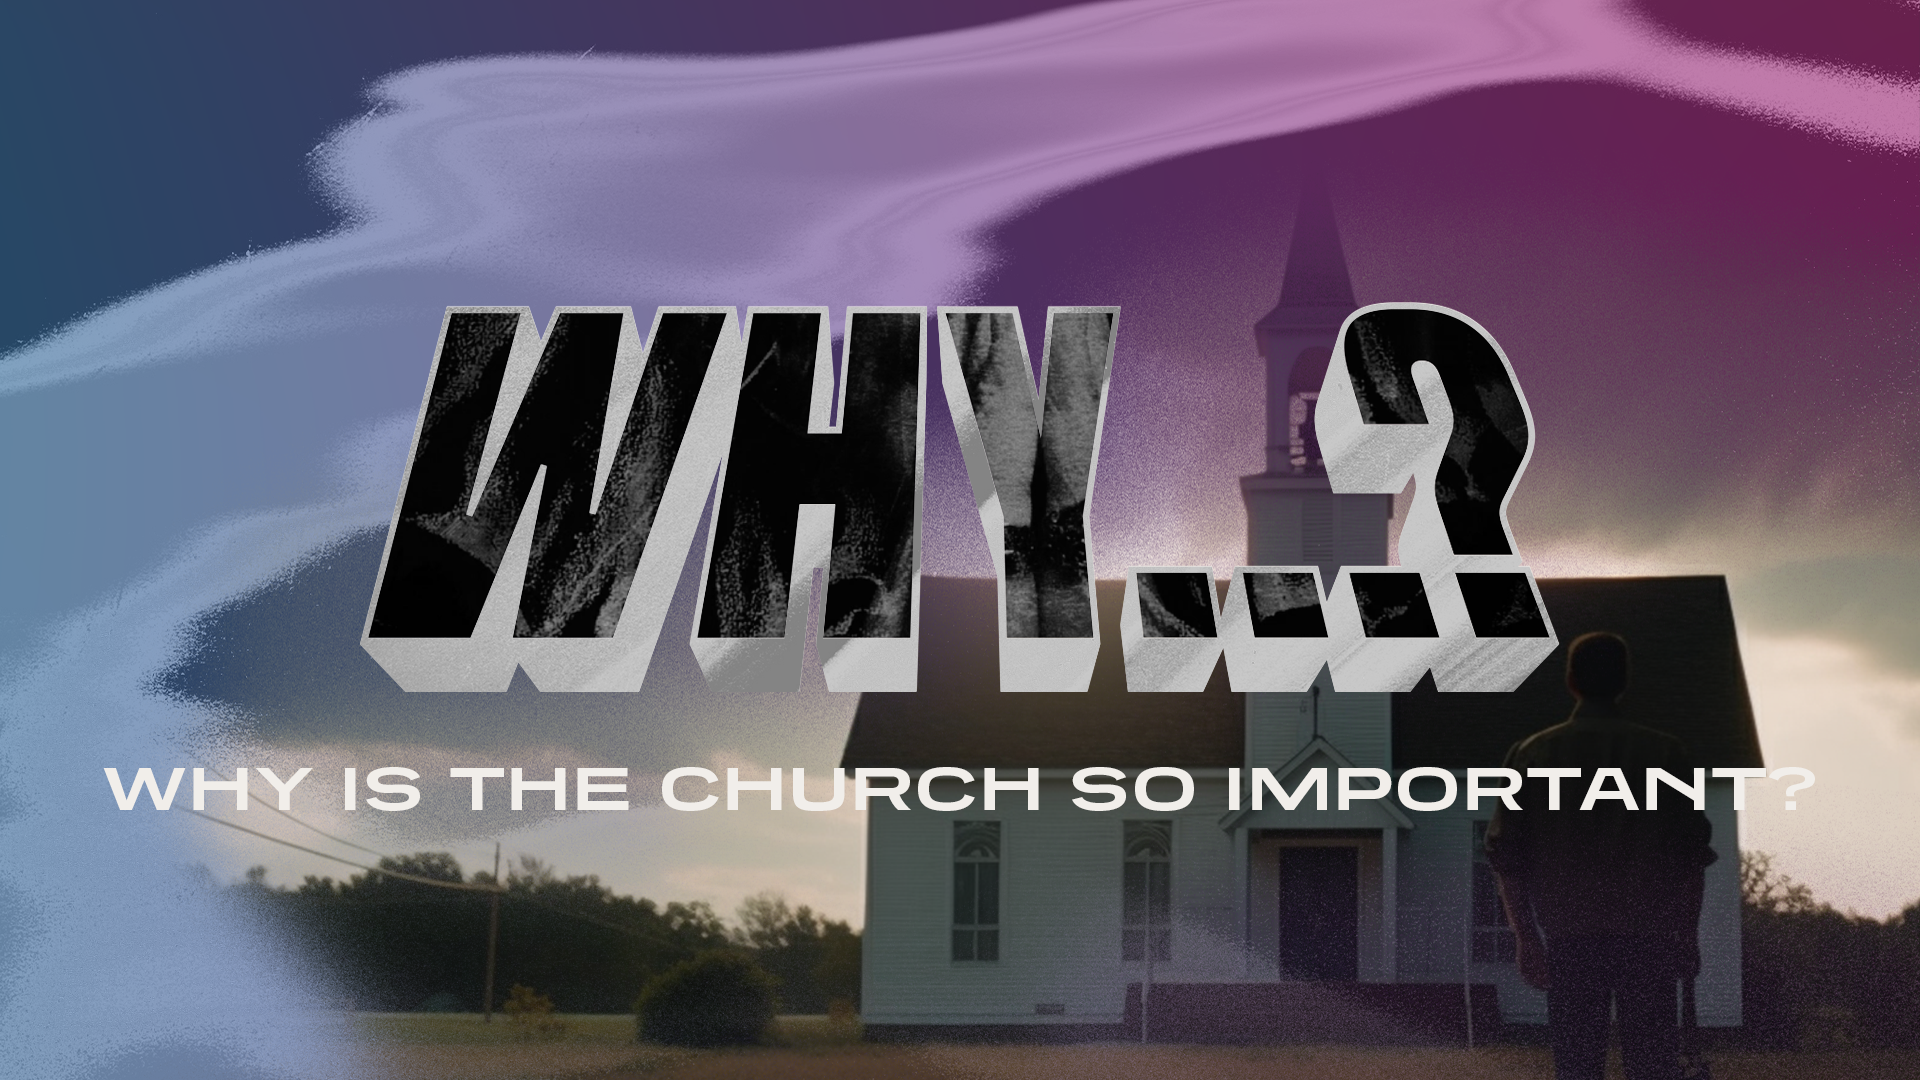 9:30 – WHY: Is the Church So Important?